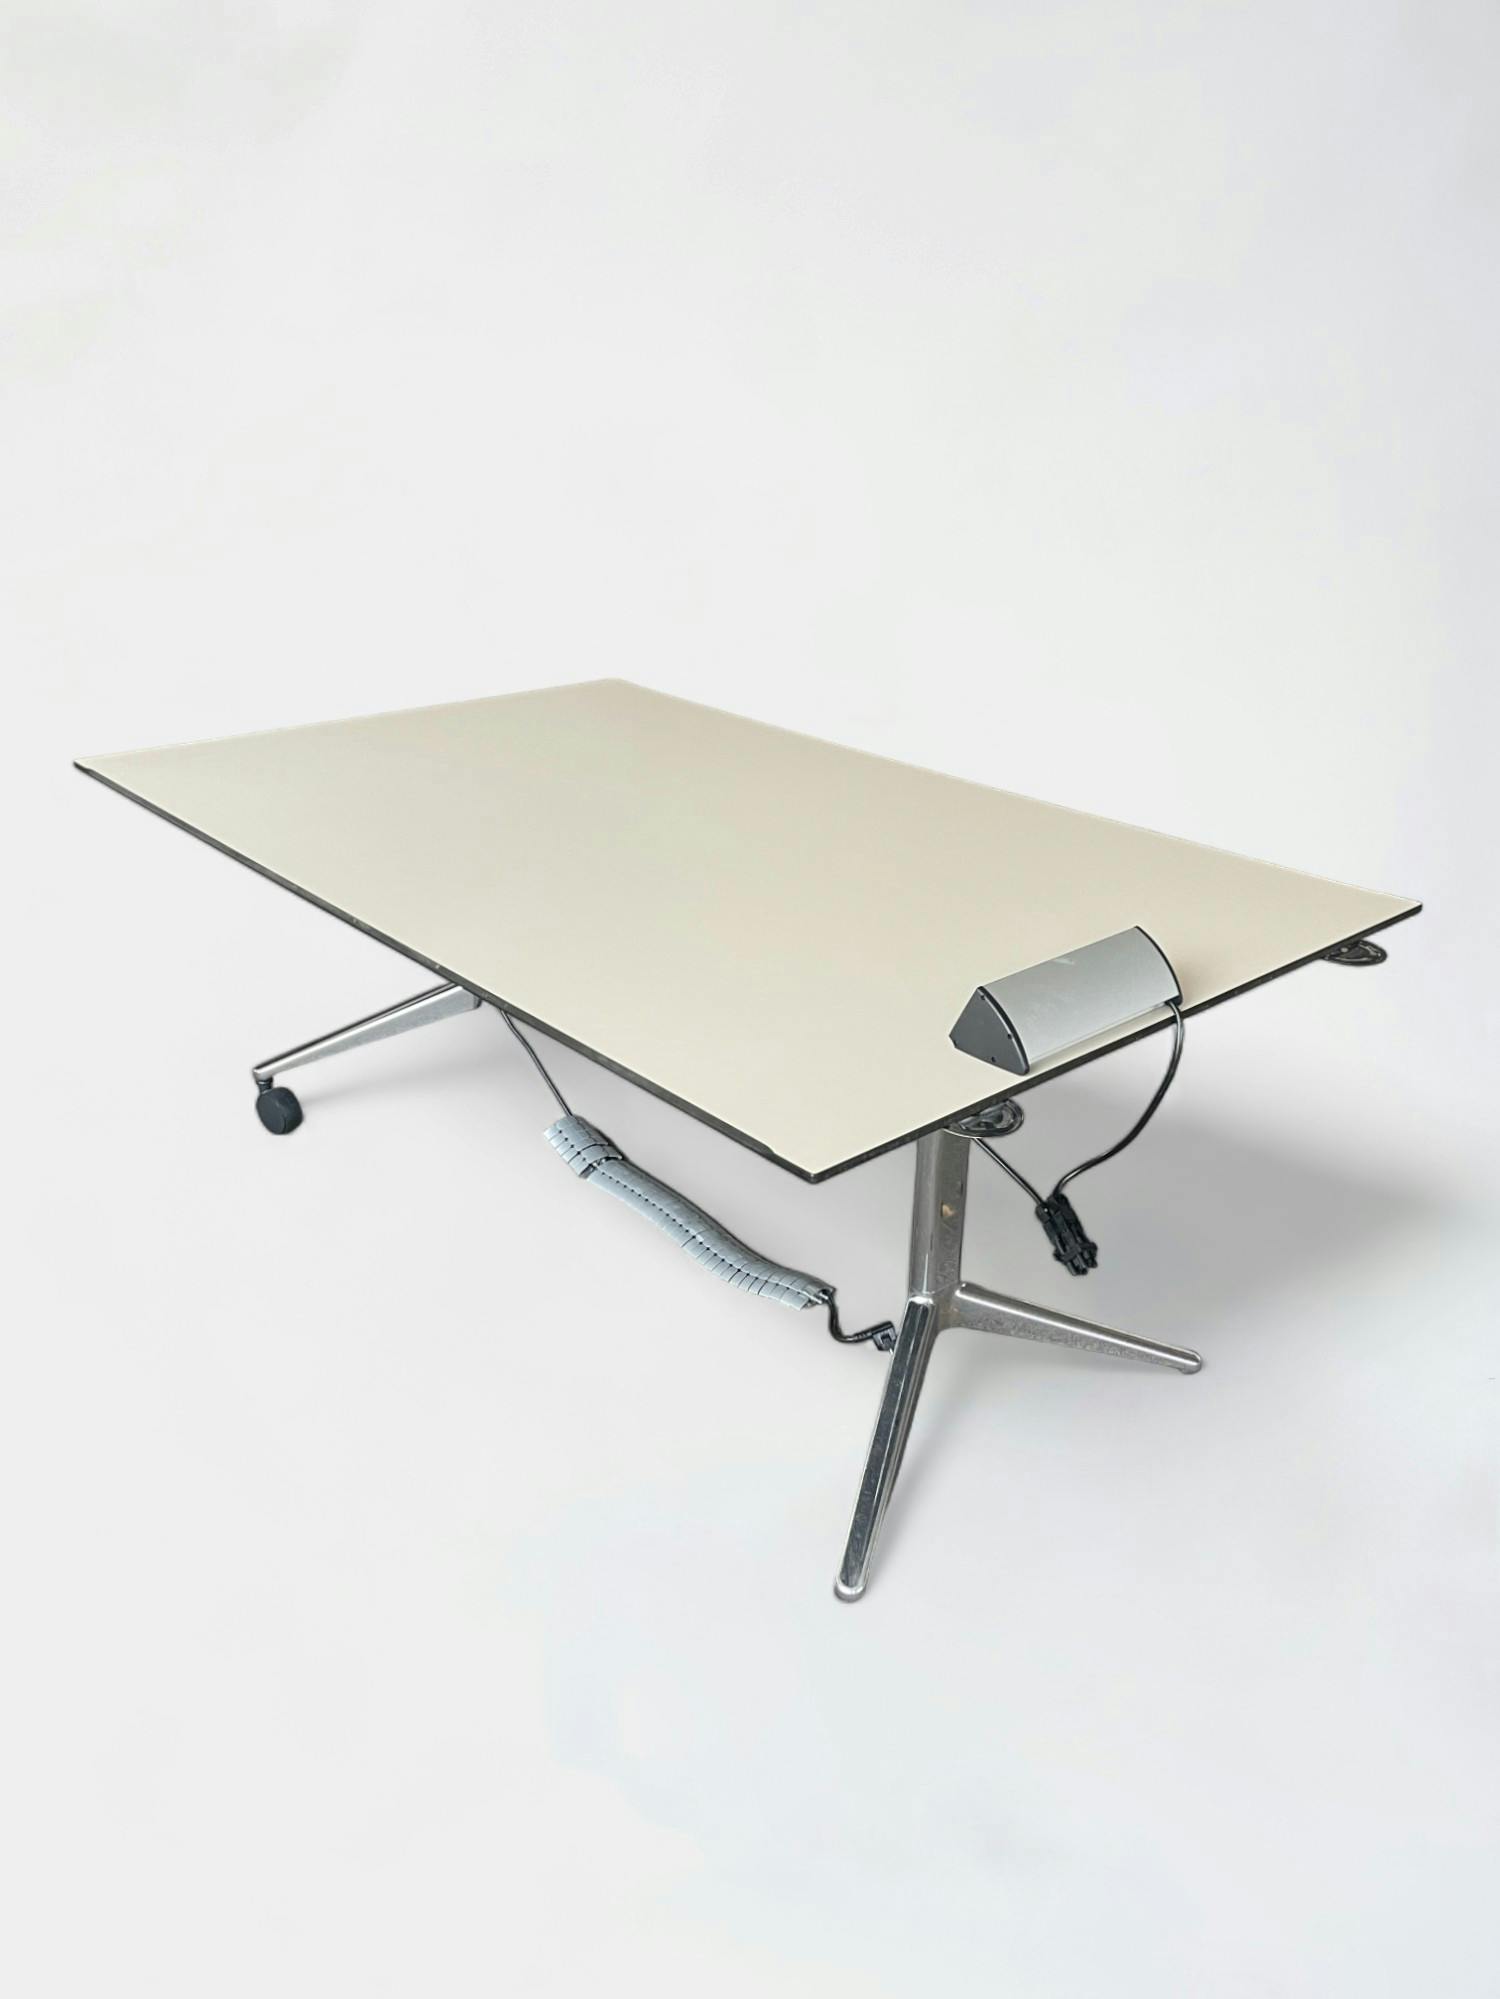 Ahrend meeting table 180x122cm - Relieve Furniture